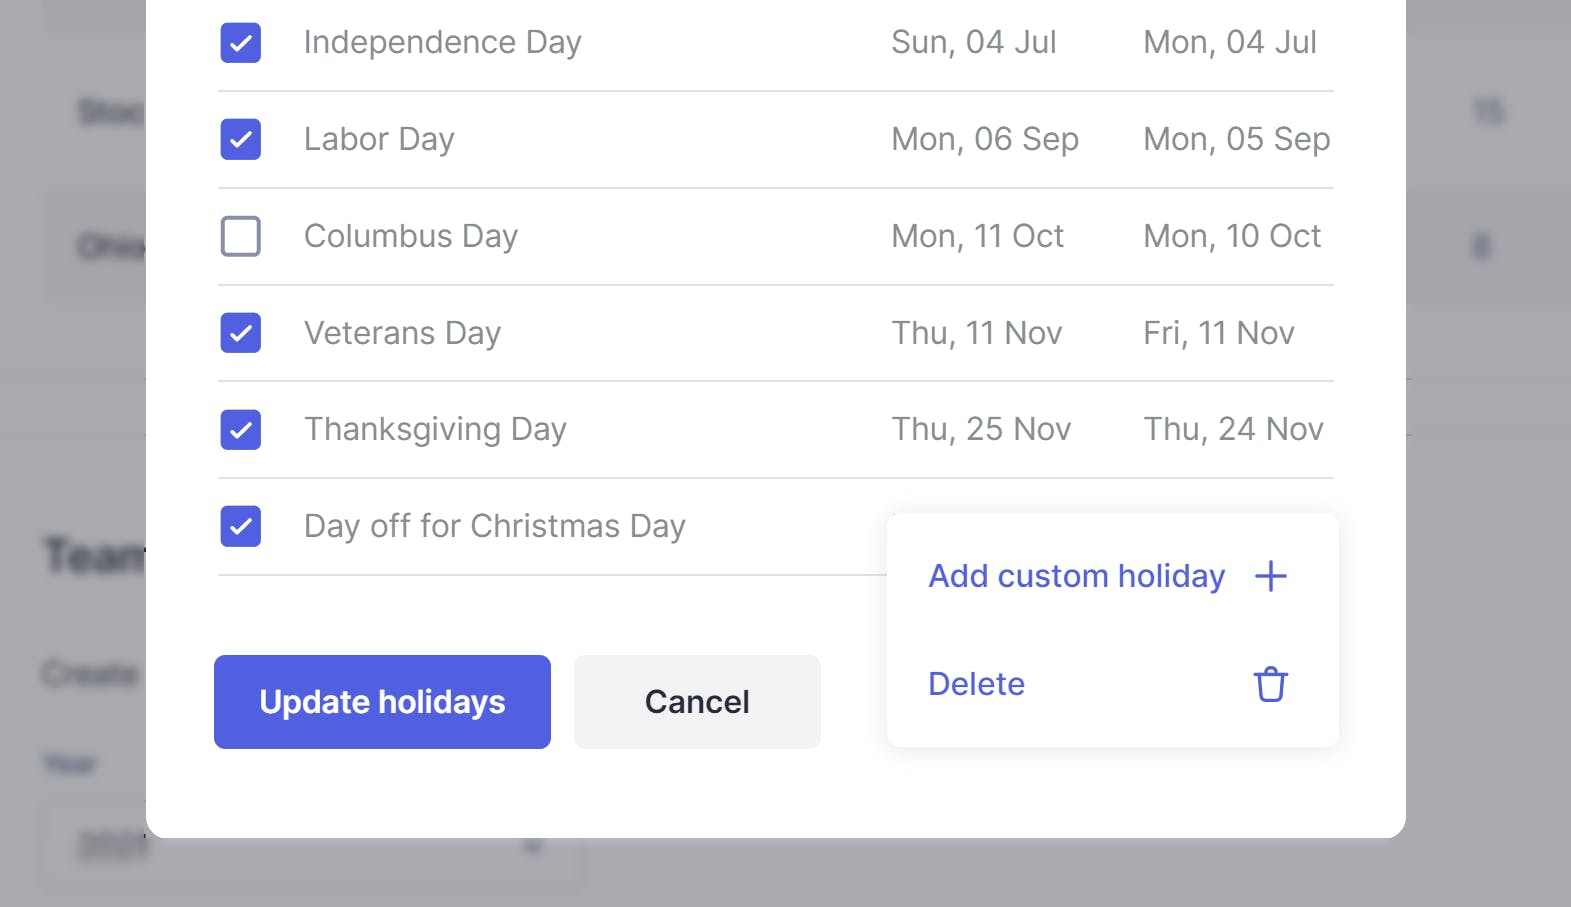 Custom holidays can be set in Float